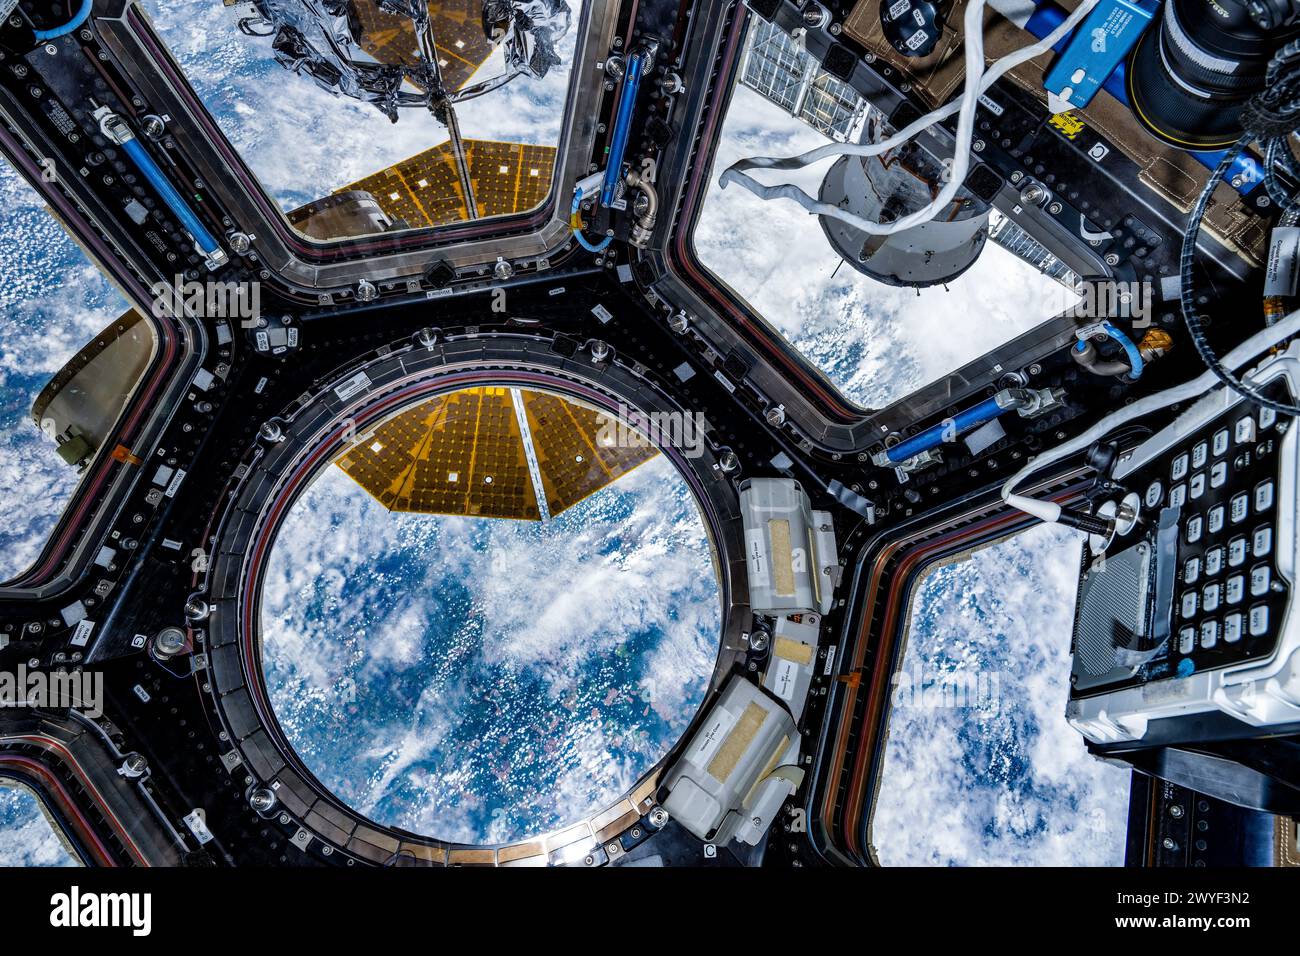 Scenics of Planet Earth viewed from the cupola of the ISS. Digital enhancement of an image furnished by NASA Stock Photo